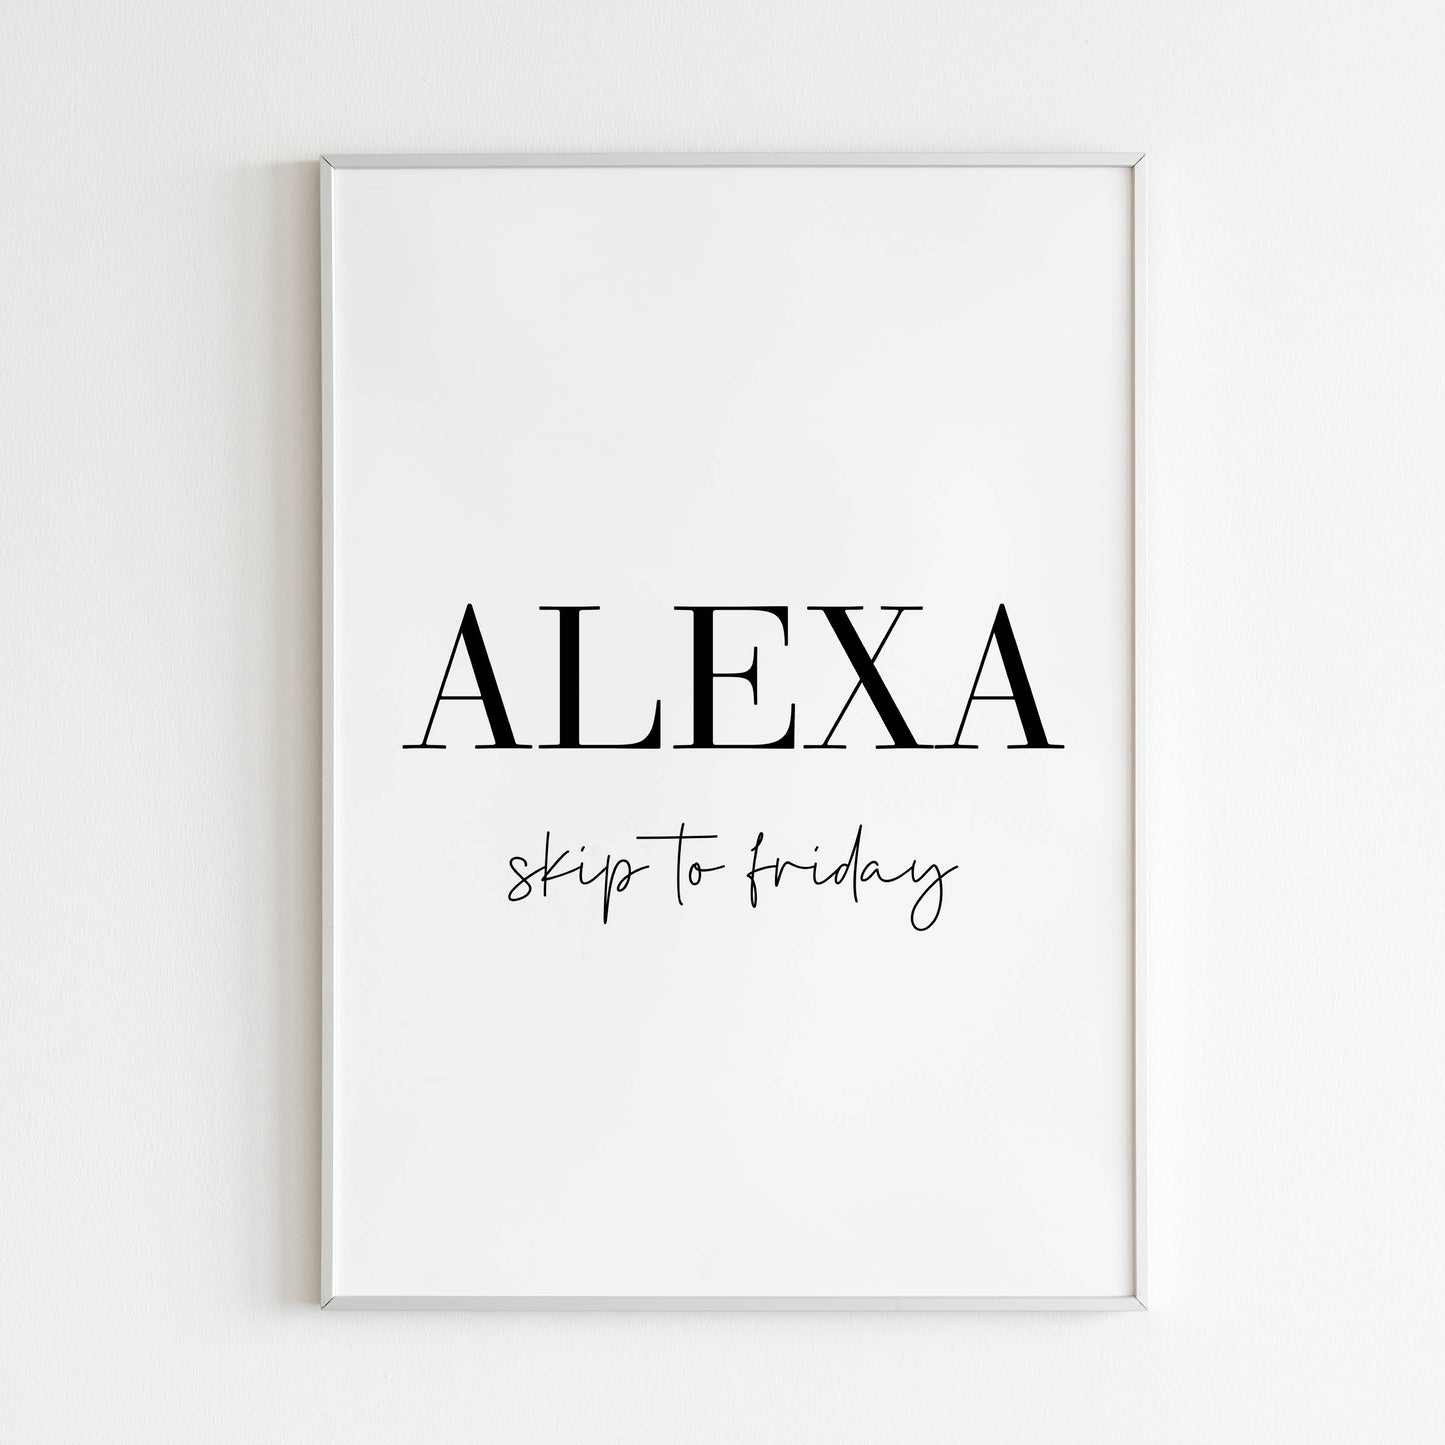 Downloadable "ALEXA, Skip to friday" art print, express your love for weekends with a touch of humor.